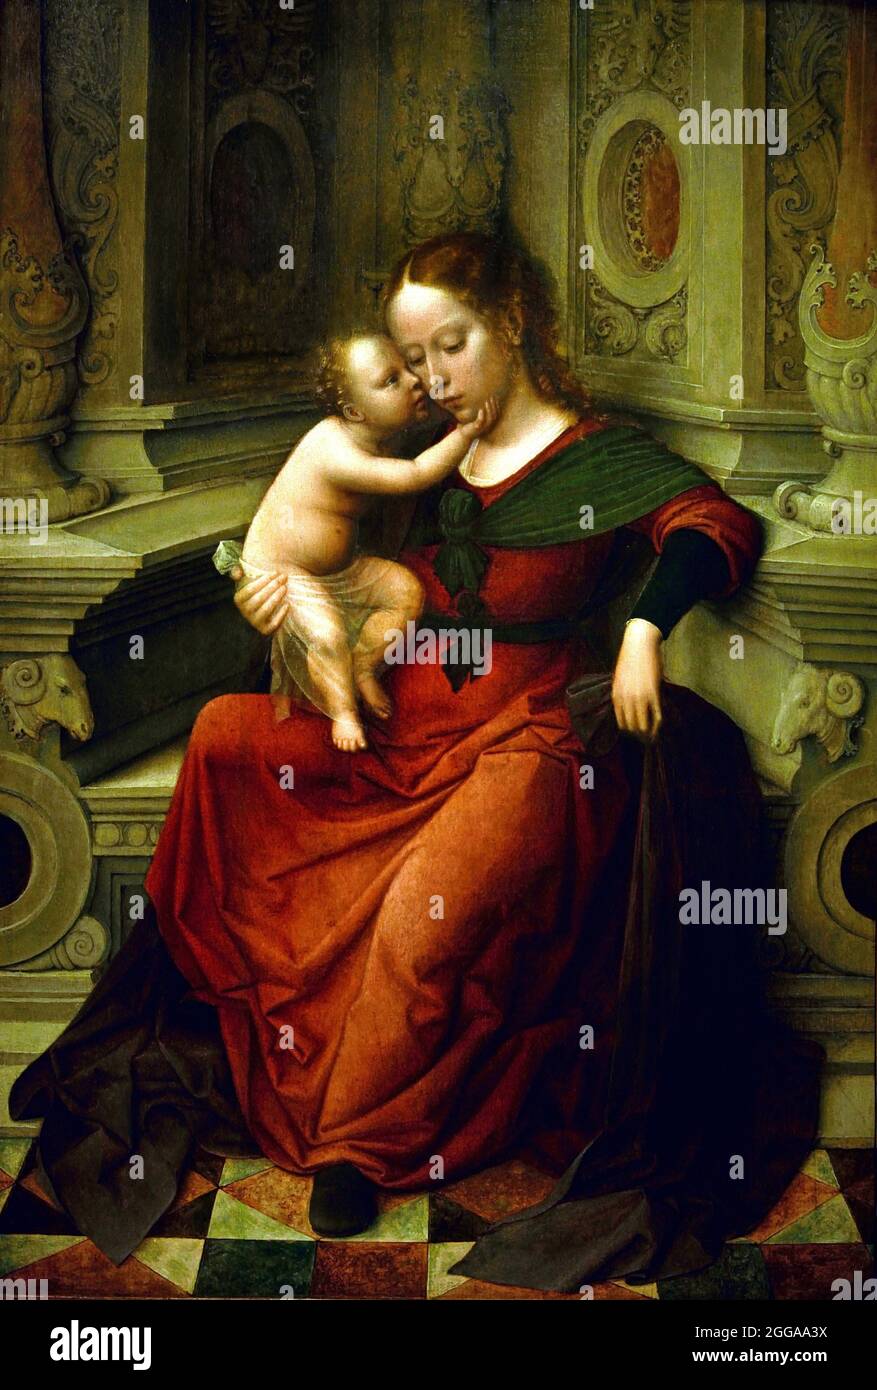 Mary with Child, Adriaen Isenbrant (attributed to) 1530 - 1540 Dutch, The Netherlands . modern (renaissance style. Pilasters and balusters, round niches, ram's heads, cornucopias and curly acanthus leaves new style, based on the architecture of classical antiquity.) Stock Photo